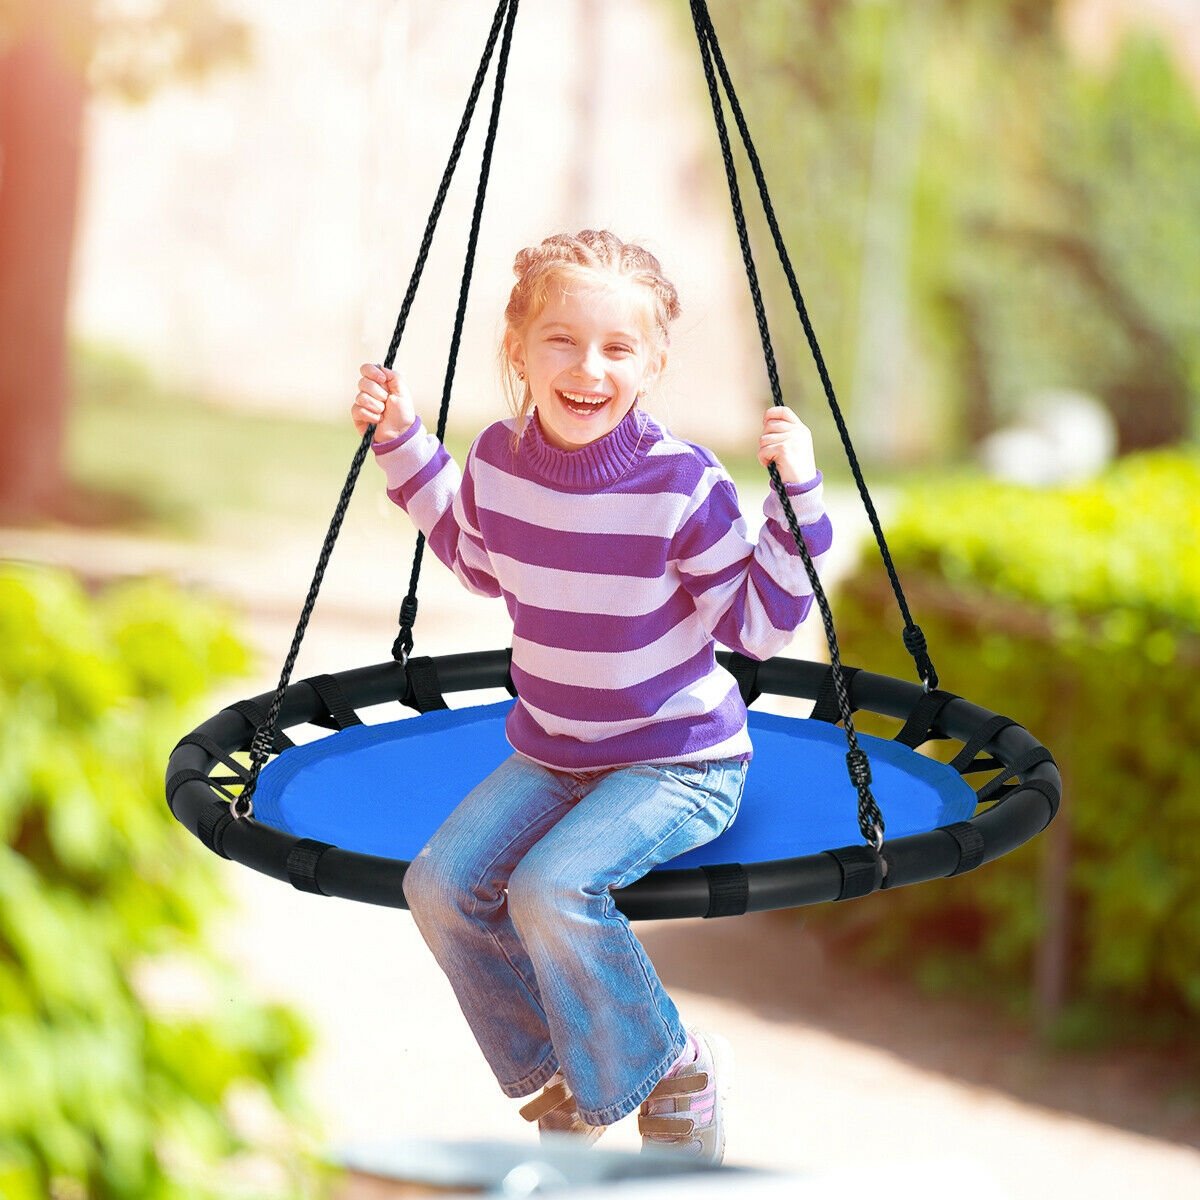 40" Flying Saucer Round Swing Kids Play Set, Blue at Gallery Canada